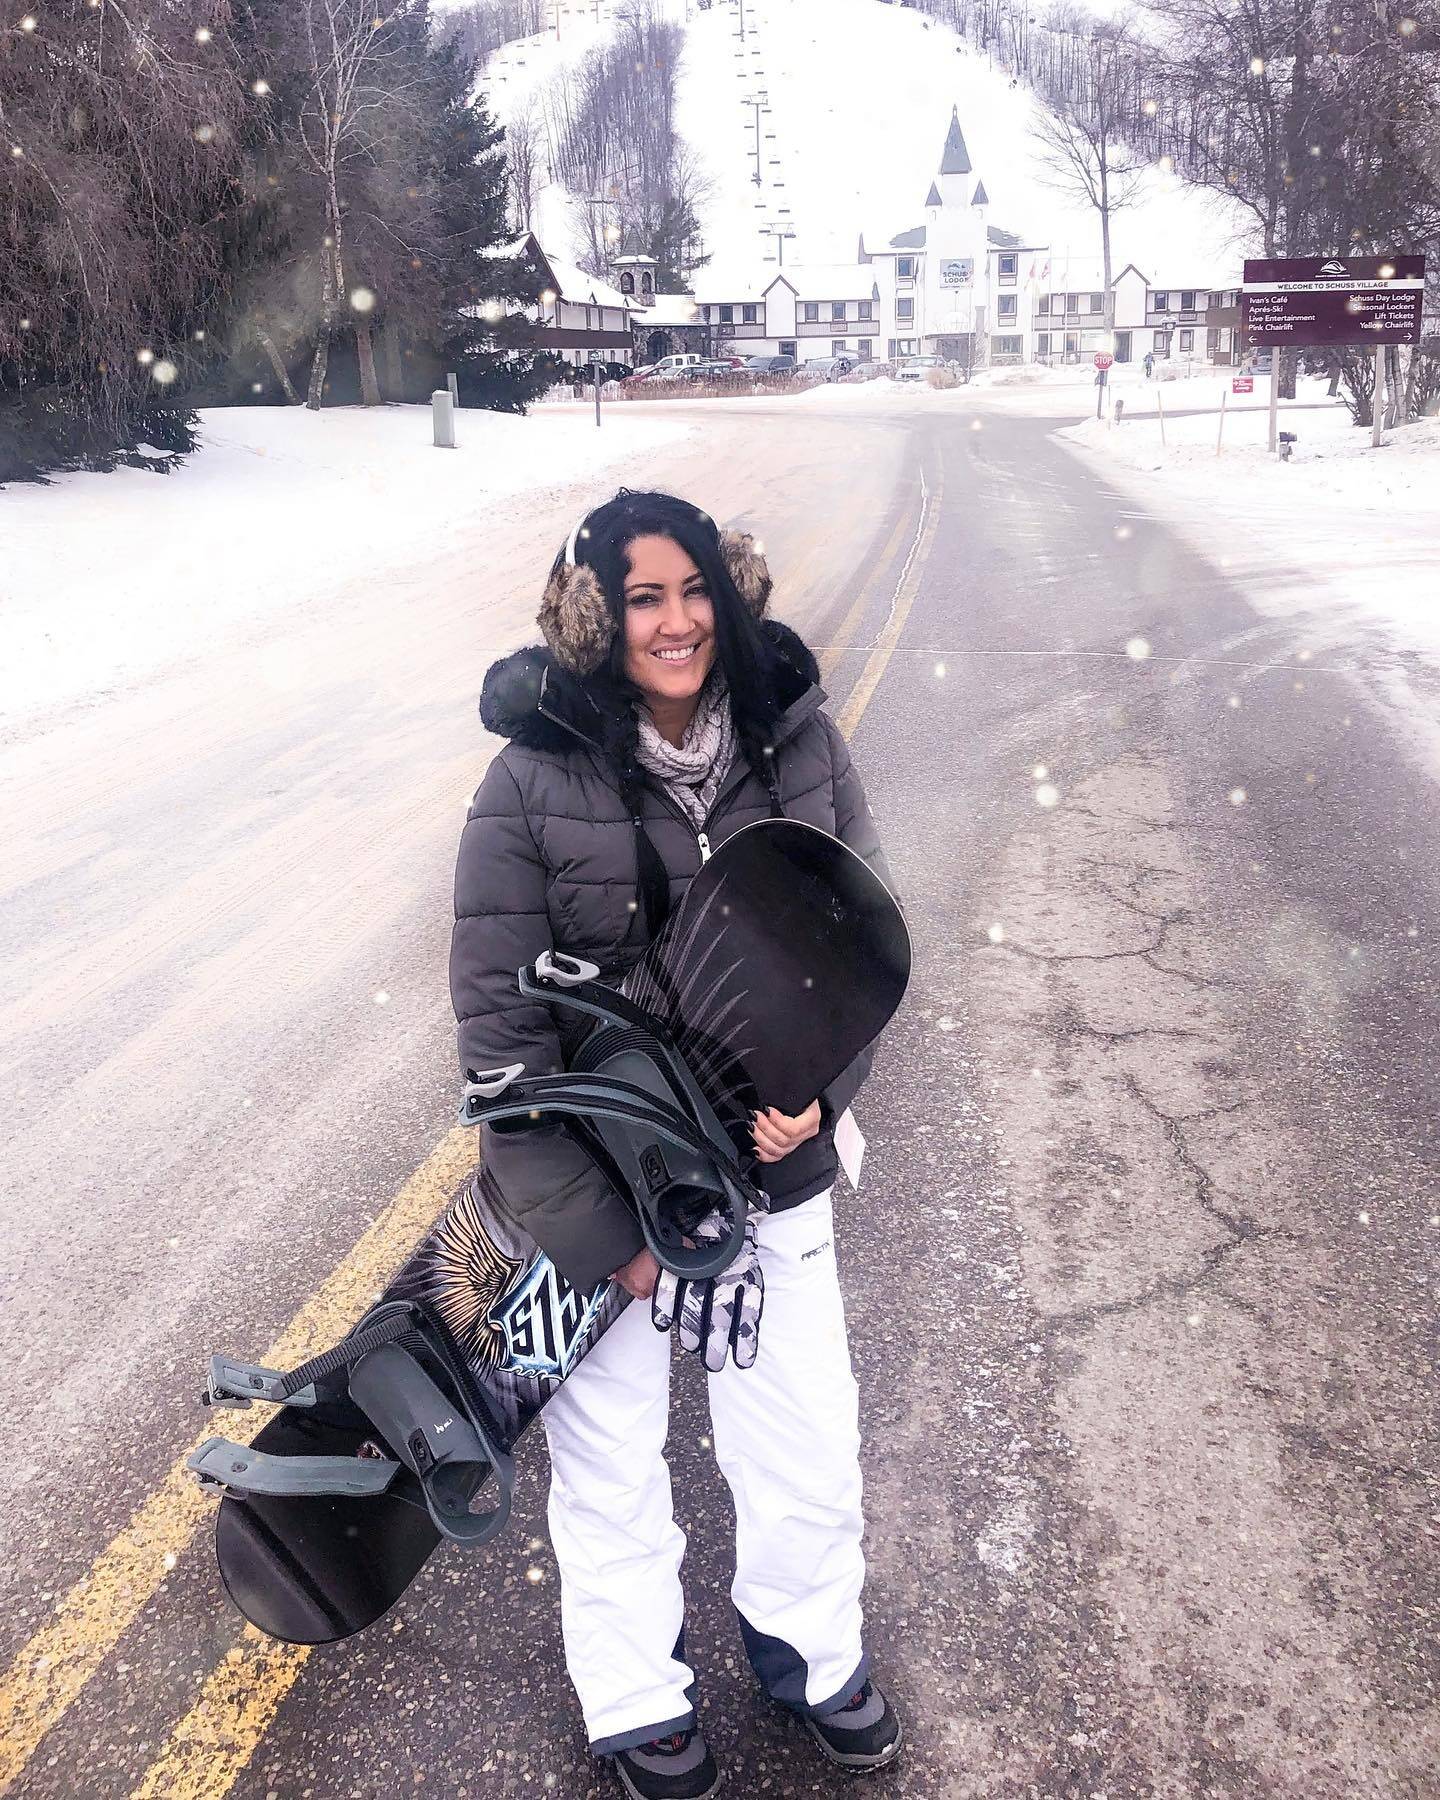 Don’t let the gear fool you I can’t even make it down the bunny hill 🐰🏂❄️
.
.
#michiganblogger #michiganwinter #bunnyhill #snowboarding #skiing #skiitrip #snowboardgirl #isuck #snow #wintersports #detroitblogger #winterwonderland #michiganwinterssuck #snowgear